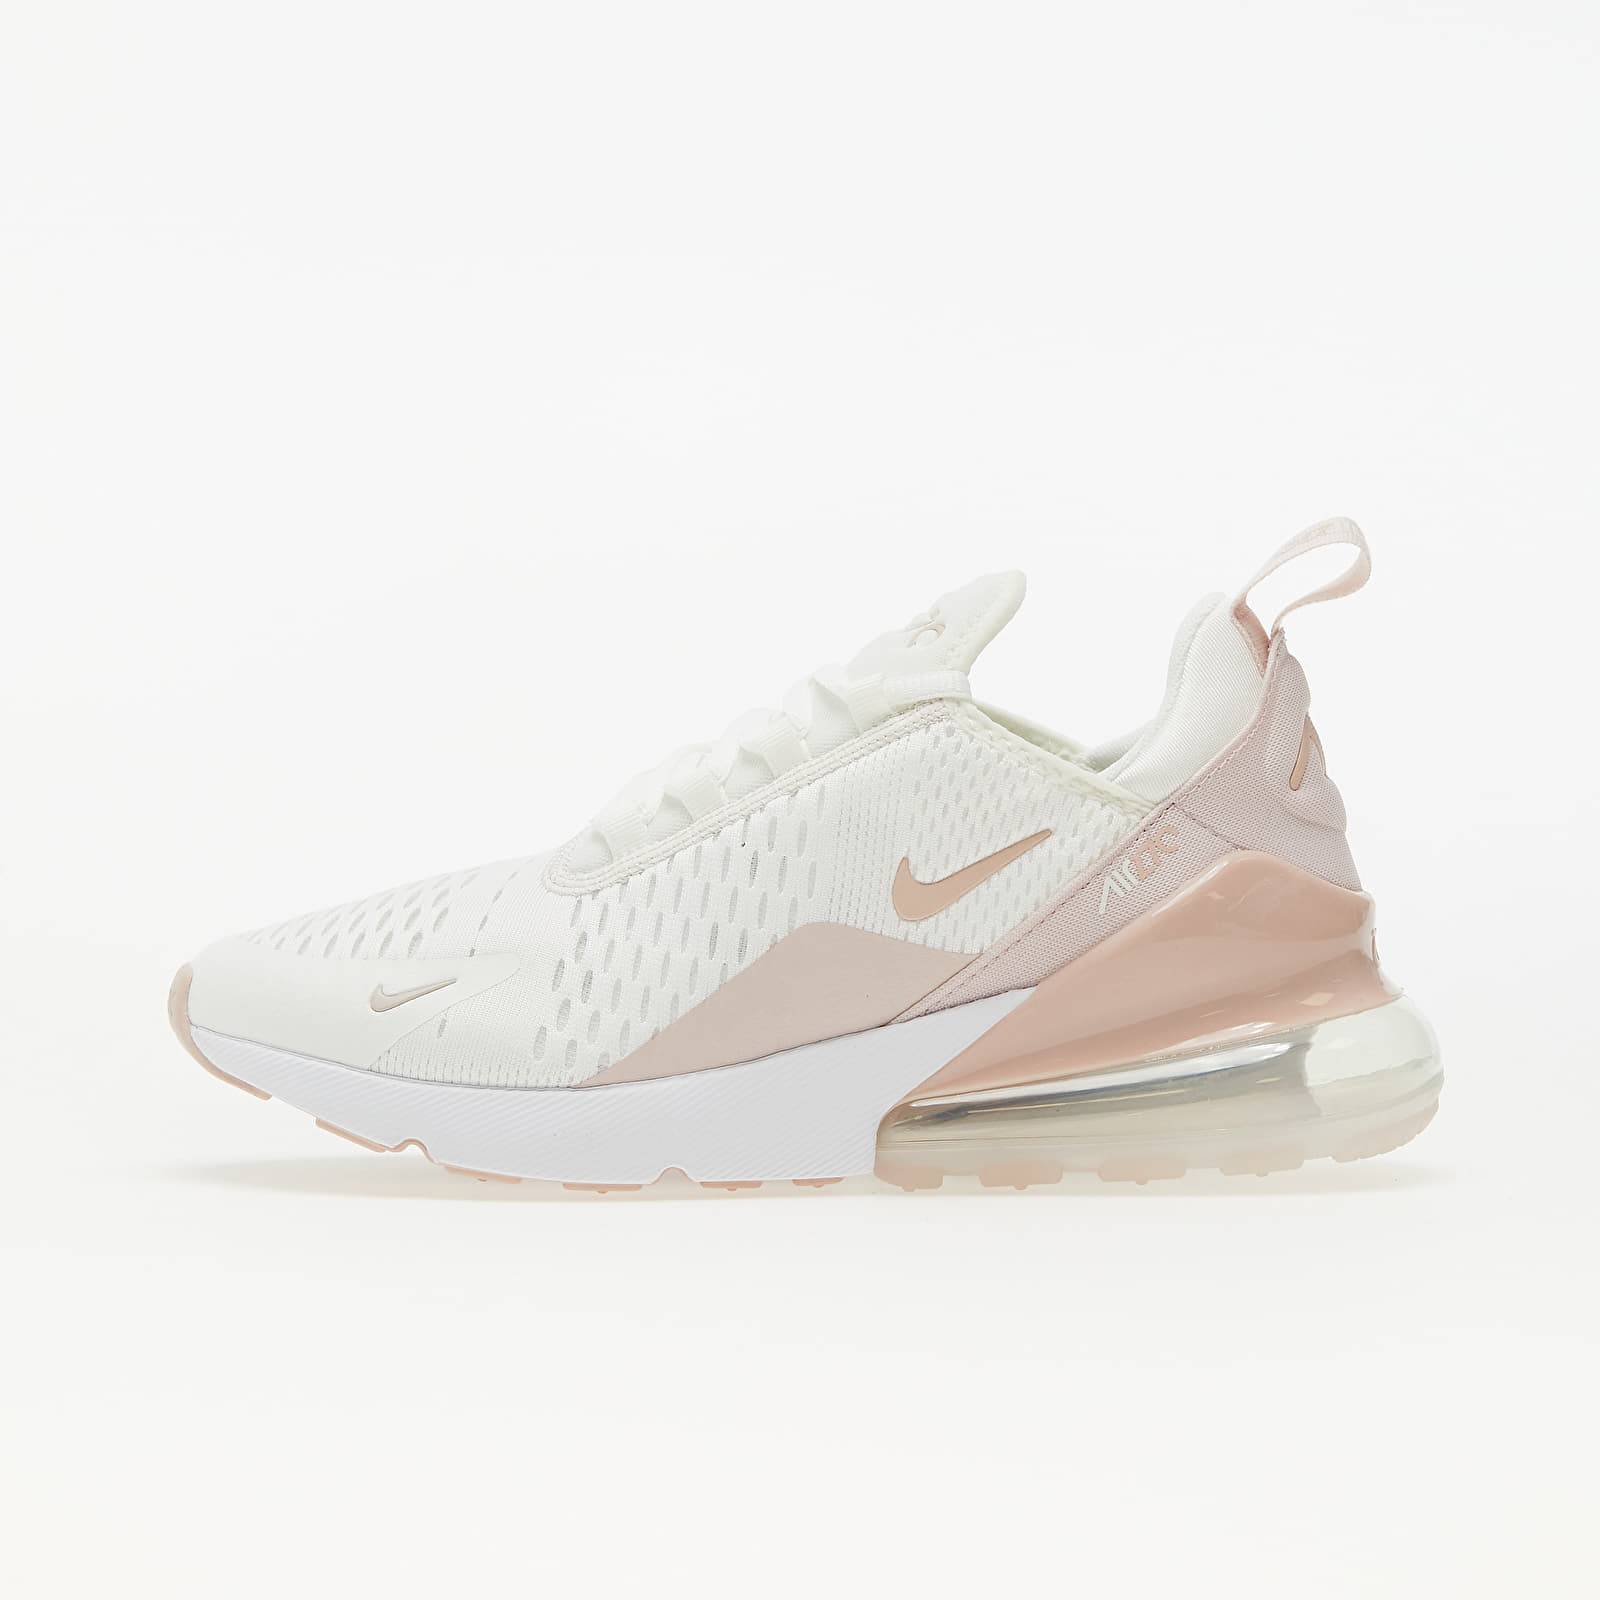 Дамски кецове и обувки Nike Wmns Air Max 270 Essential Summit White/ Pink Oxford-Barely Rose 728362